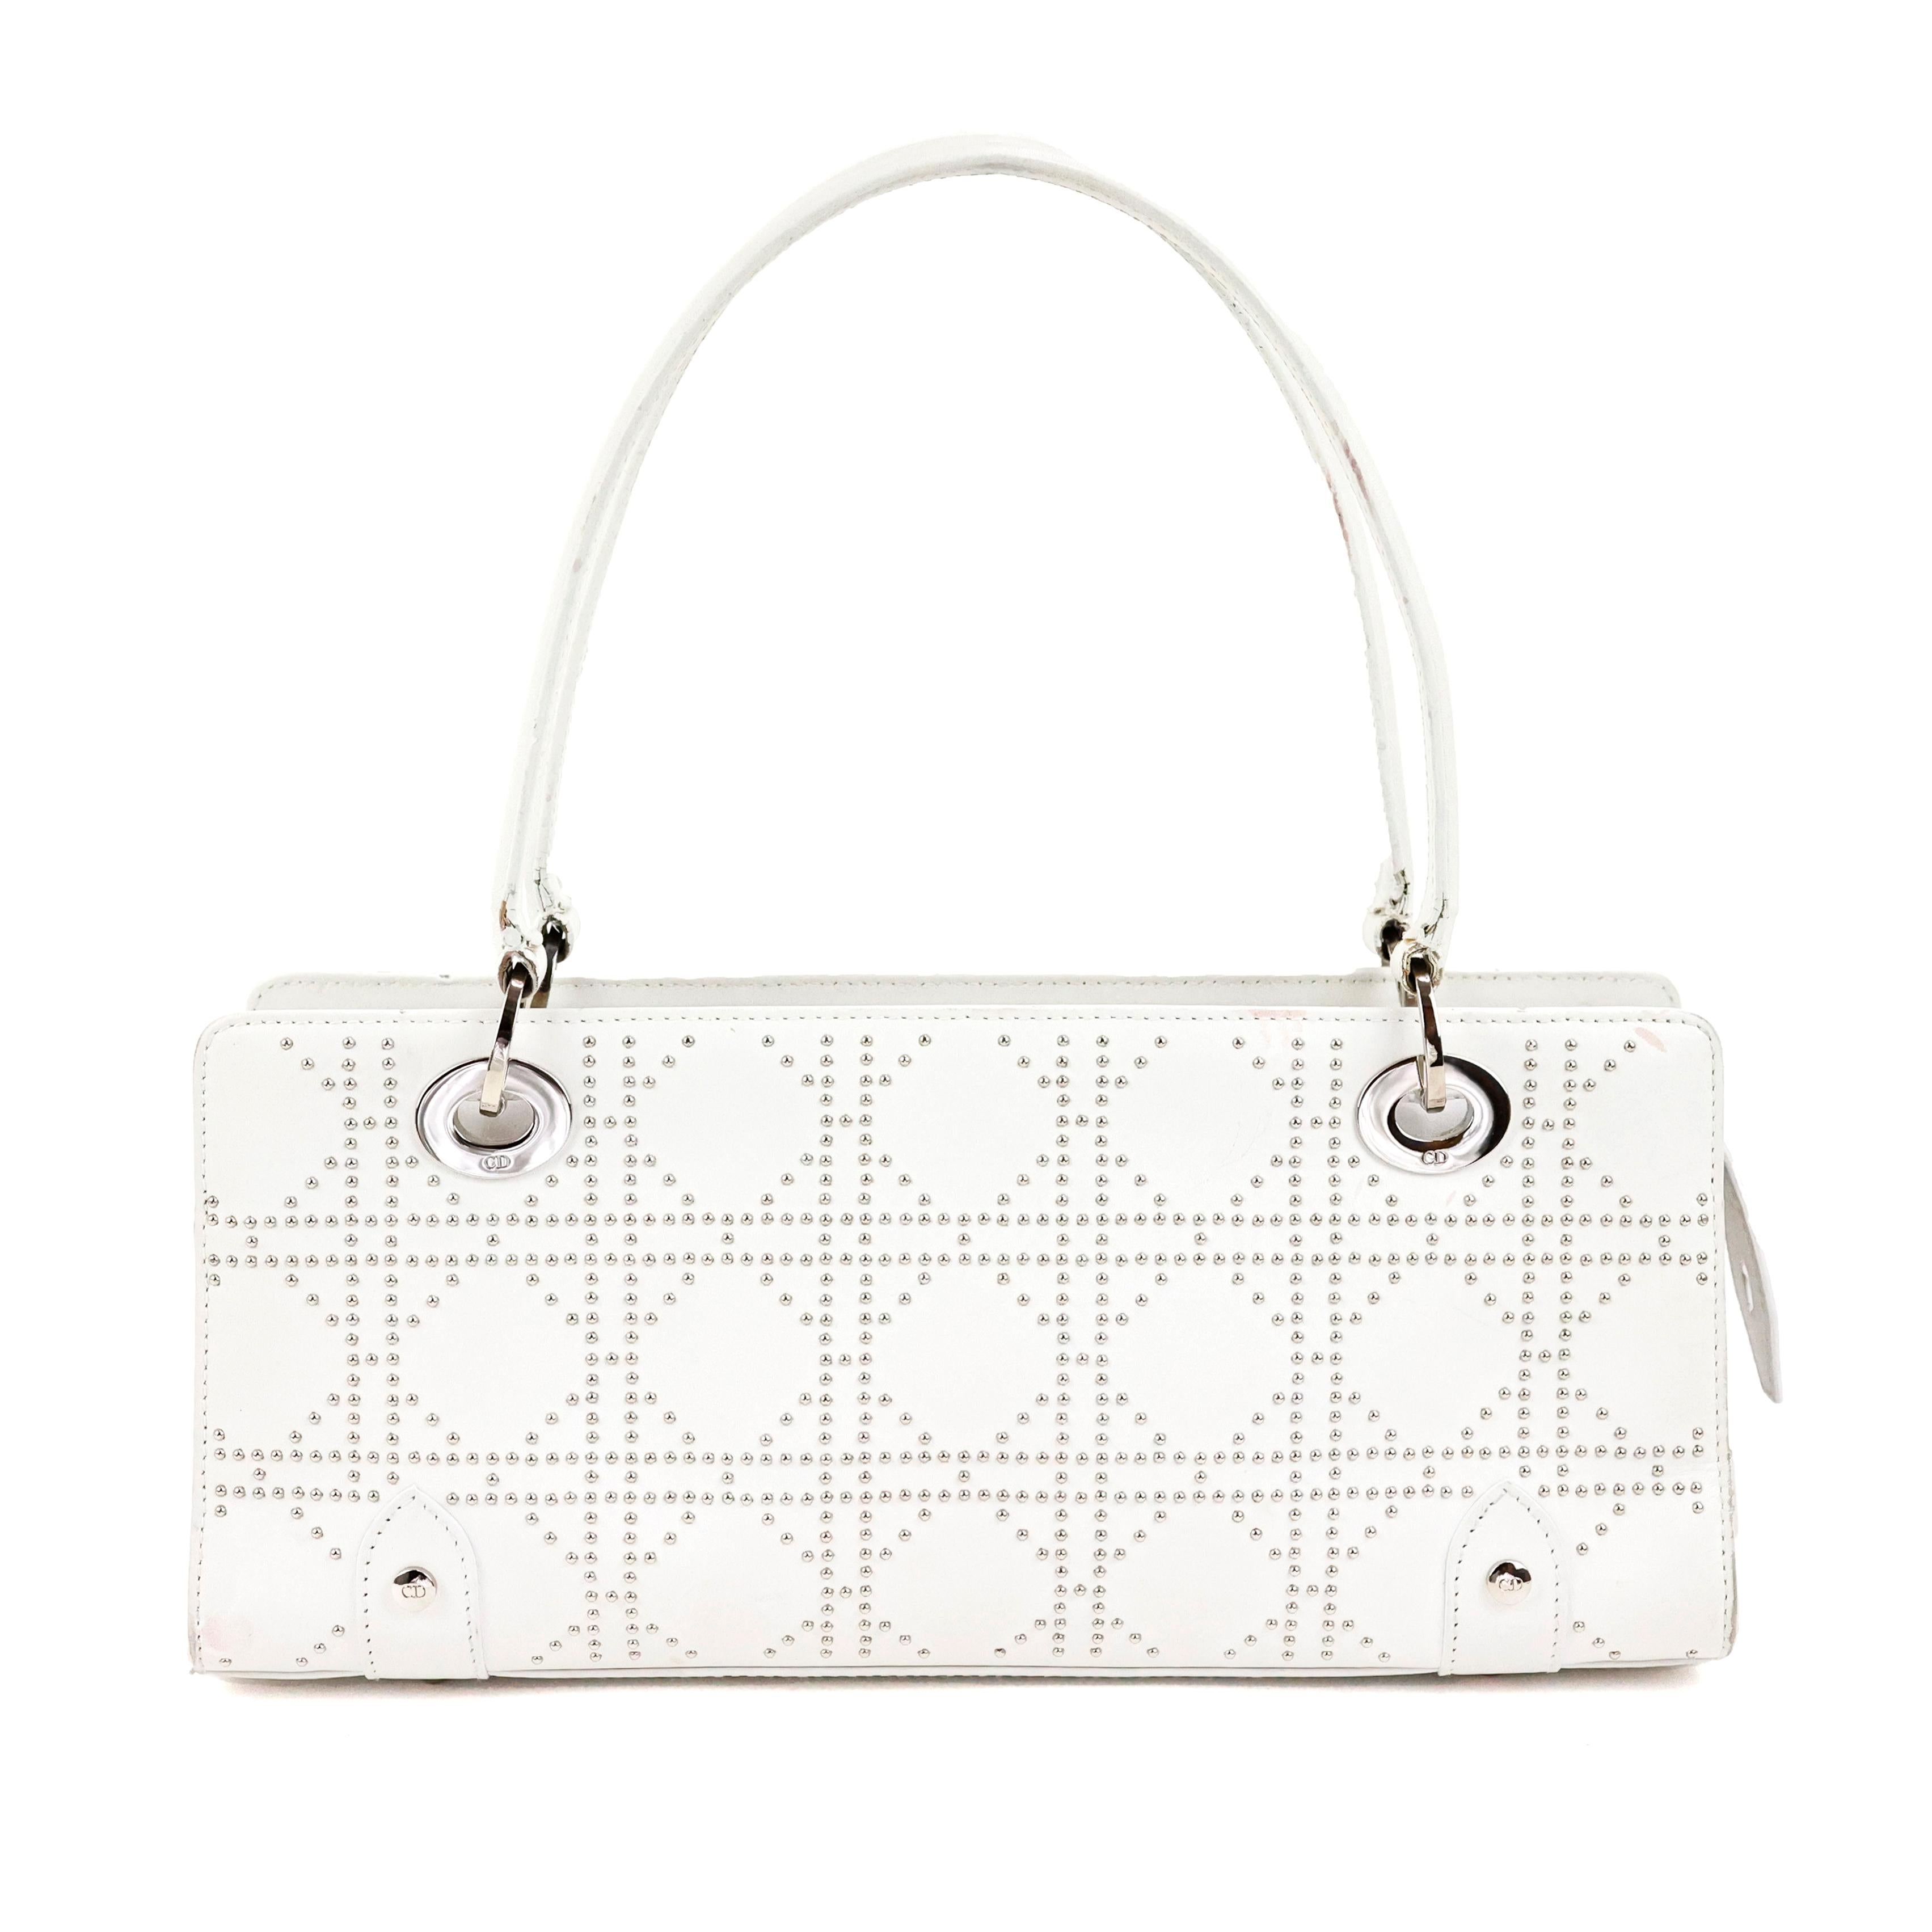 Dior Lady Dior Joy in white studded calfskin leather, silver hardware.

Condition:
Good. To note: slight signs of wear on handles, some spots on the leather.

Measurements:
32cm x 14,5cm x 10cm